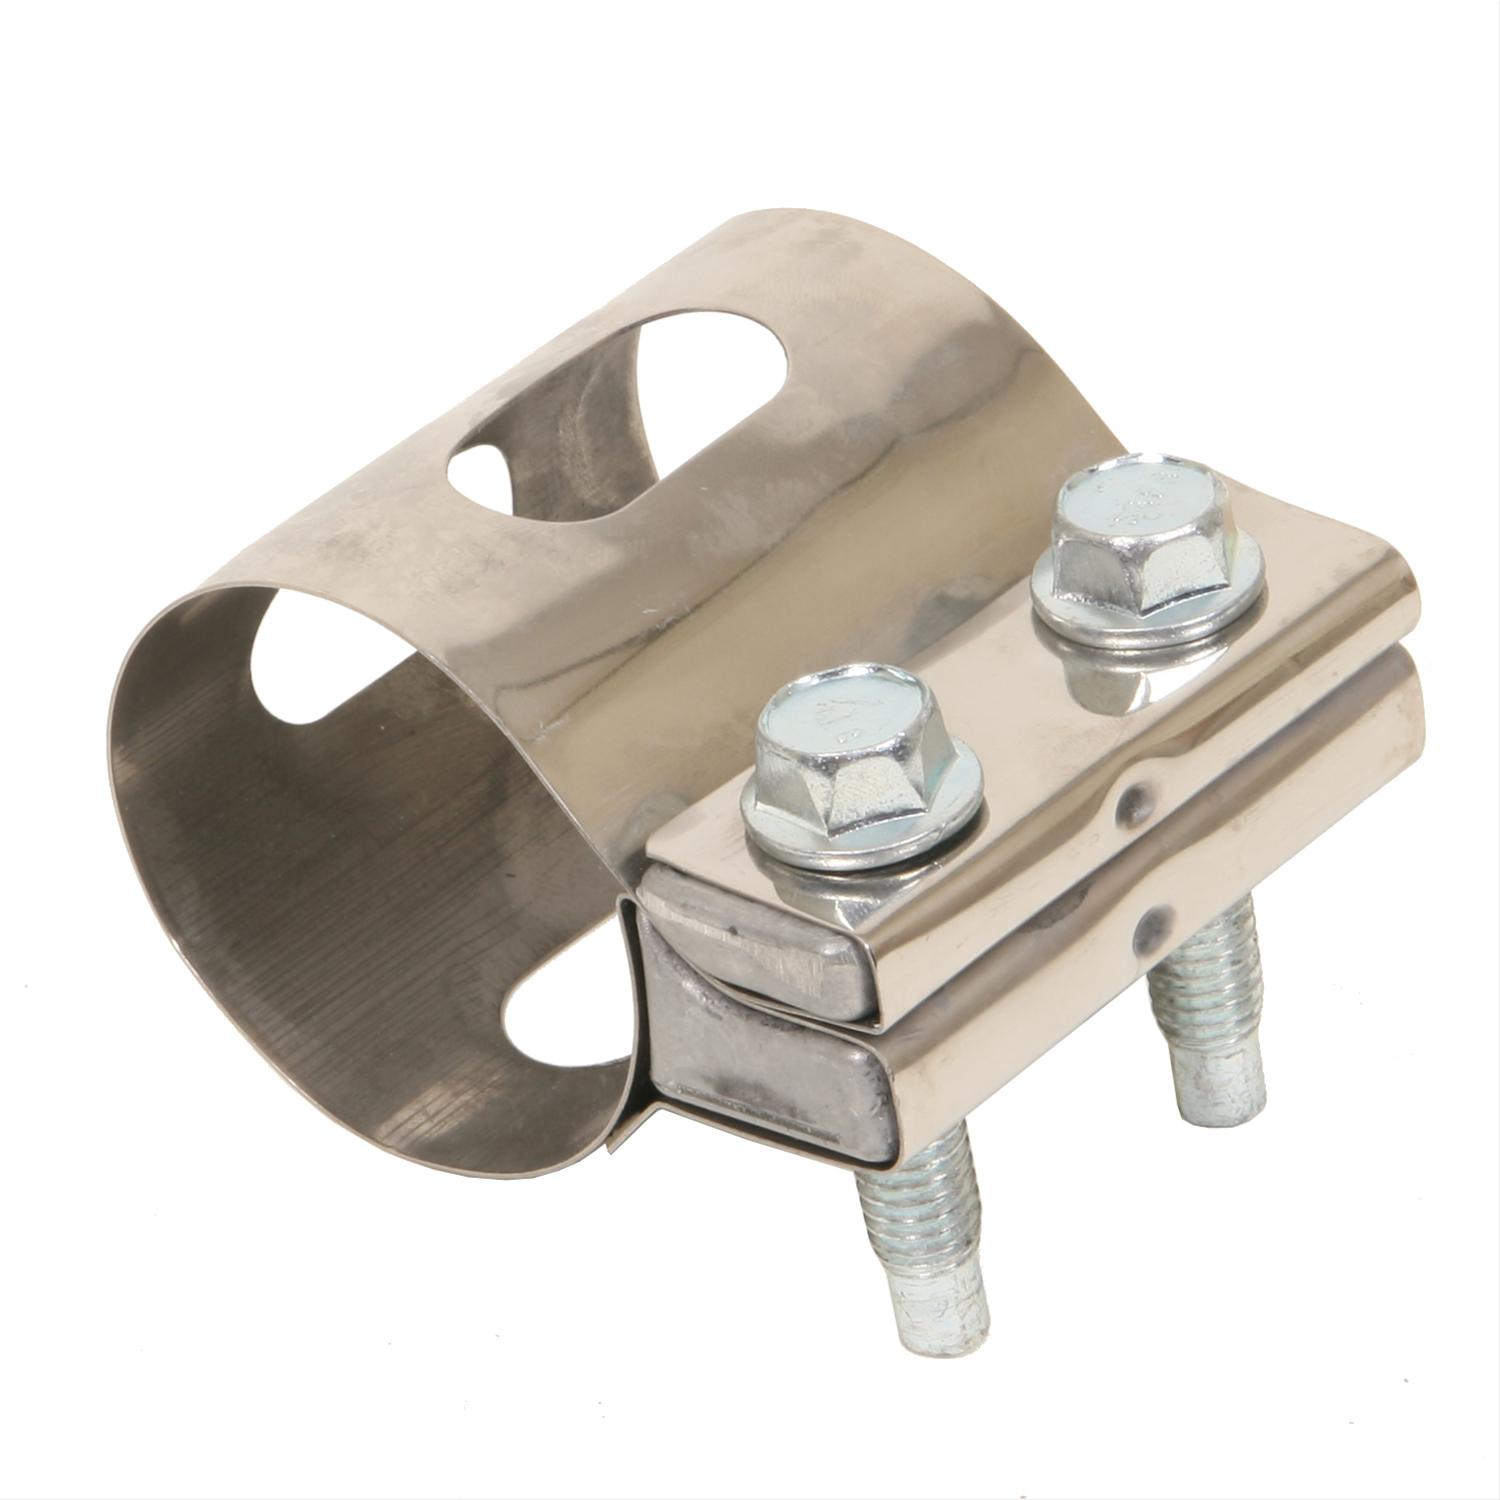 Summit Racing® Exhaust Welding Clamps SUM-693330 - Free Shipping on